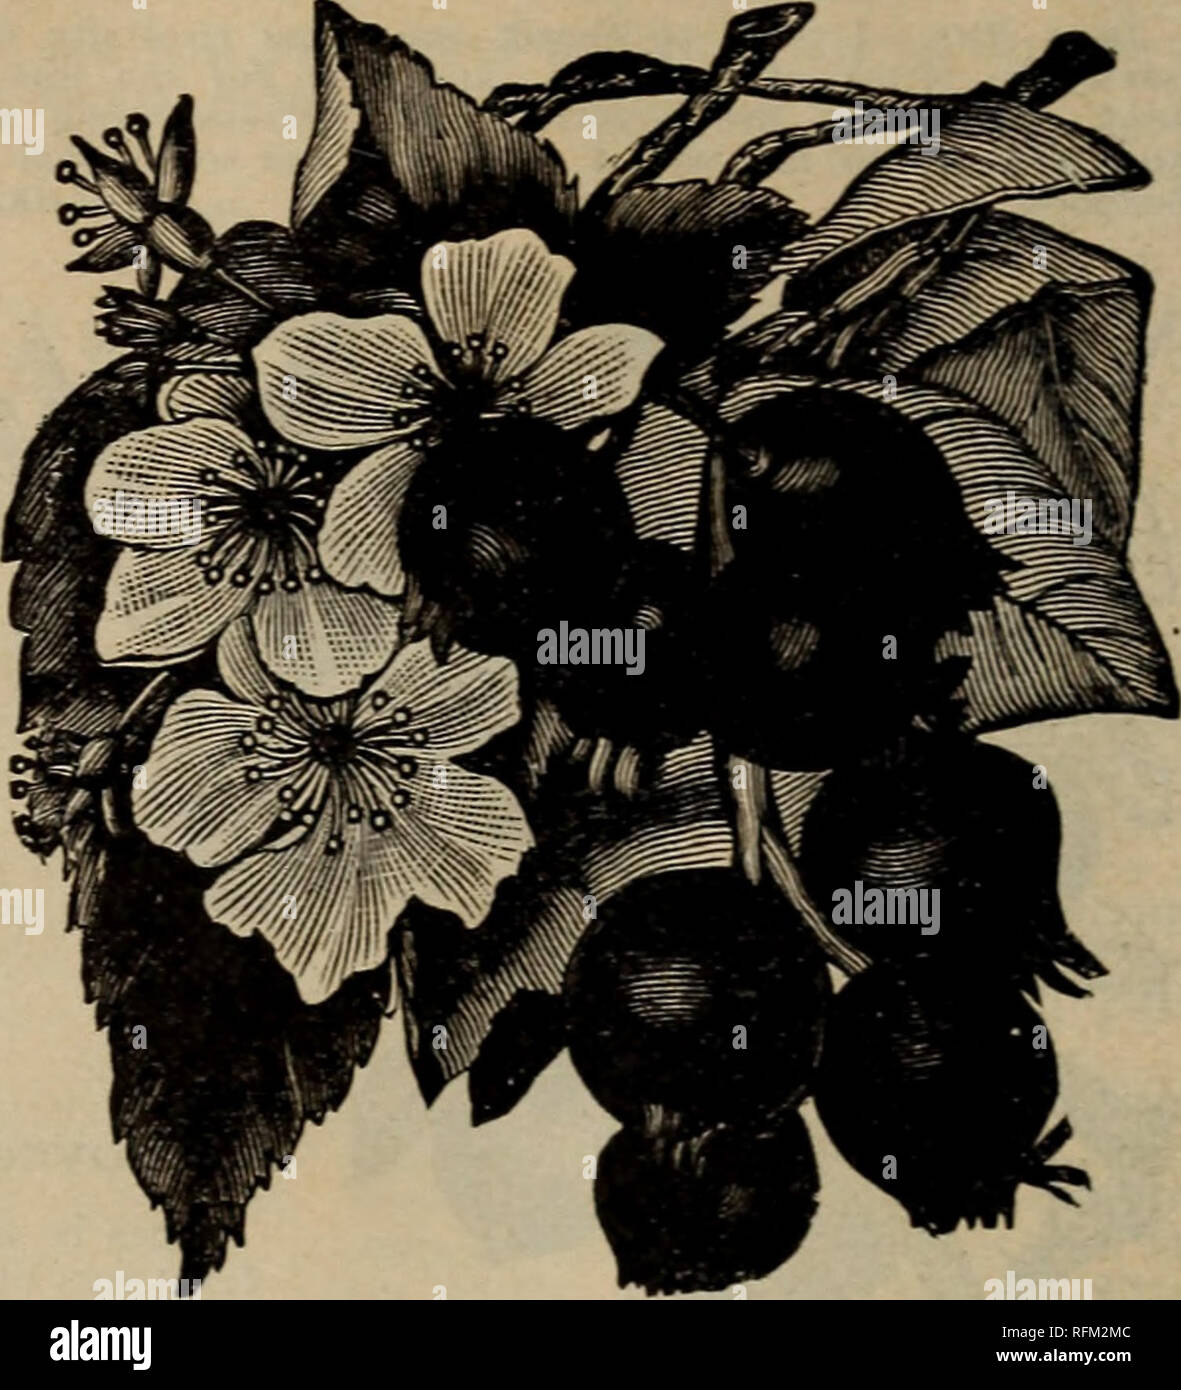 . Everything for the fruit grower : 1899. Nurseries (Horticulture), Ohio, Bridgeport, Catalogs; Nursery stock, Ohio, Catalogs; Fruit trees, Seedlings, Catalogs; Fruit, Catalogs; Flowers, Catalogs; Plants, Ornamental, Catalogs. Eleagnus Long^pes. ELEAGNUS LONGIPES. This new and valuable acquisition, a native of Japan, is one of our most promising new fruits, and we highly recommend it for more general planting. It is worthy a place in both fruit and ornamental collections, as its beau- tiful shape as a shrub, with its dark green foliage, makes it a very conspicuous sight, especially when loaded Stock Photo